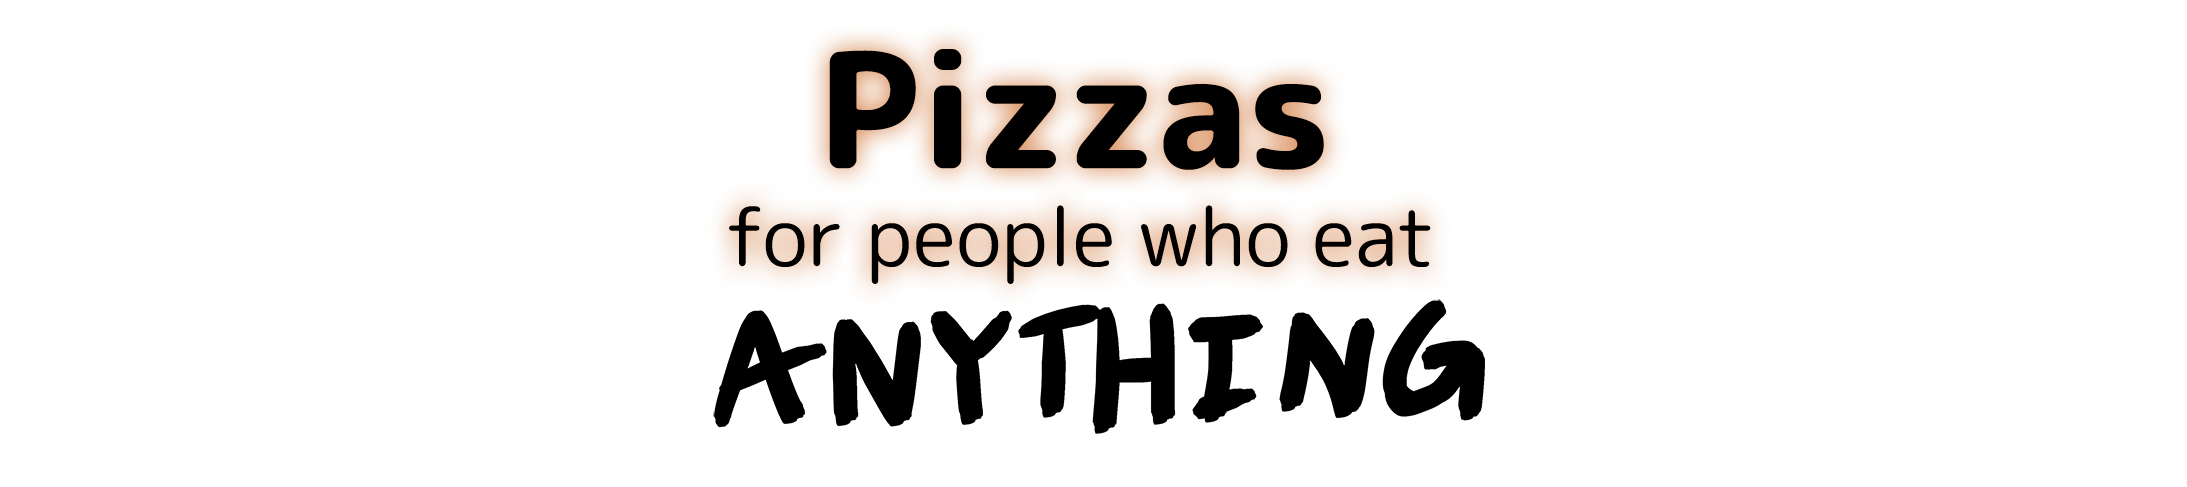 Pizzas for people who eat ANYTHING